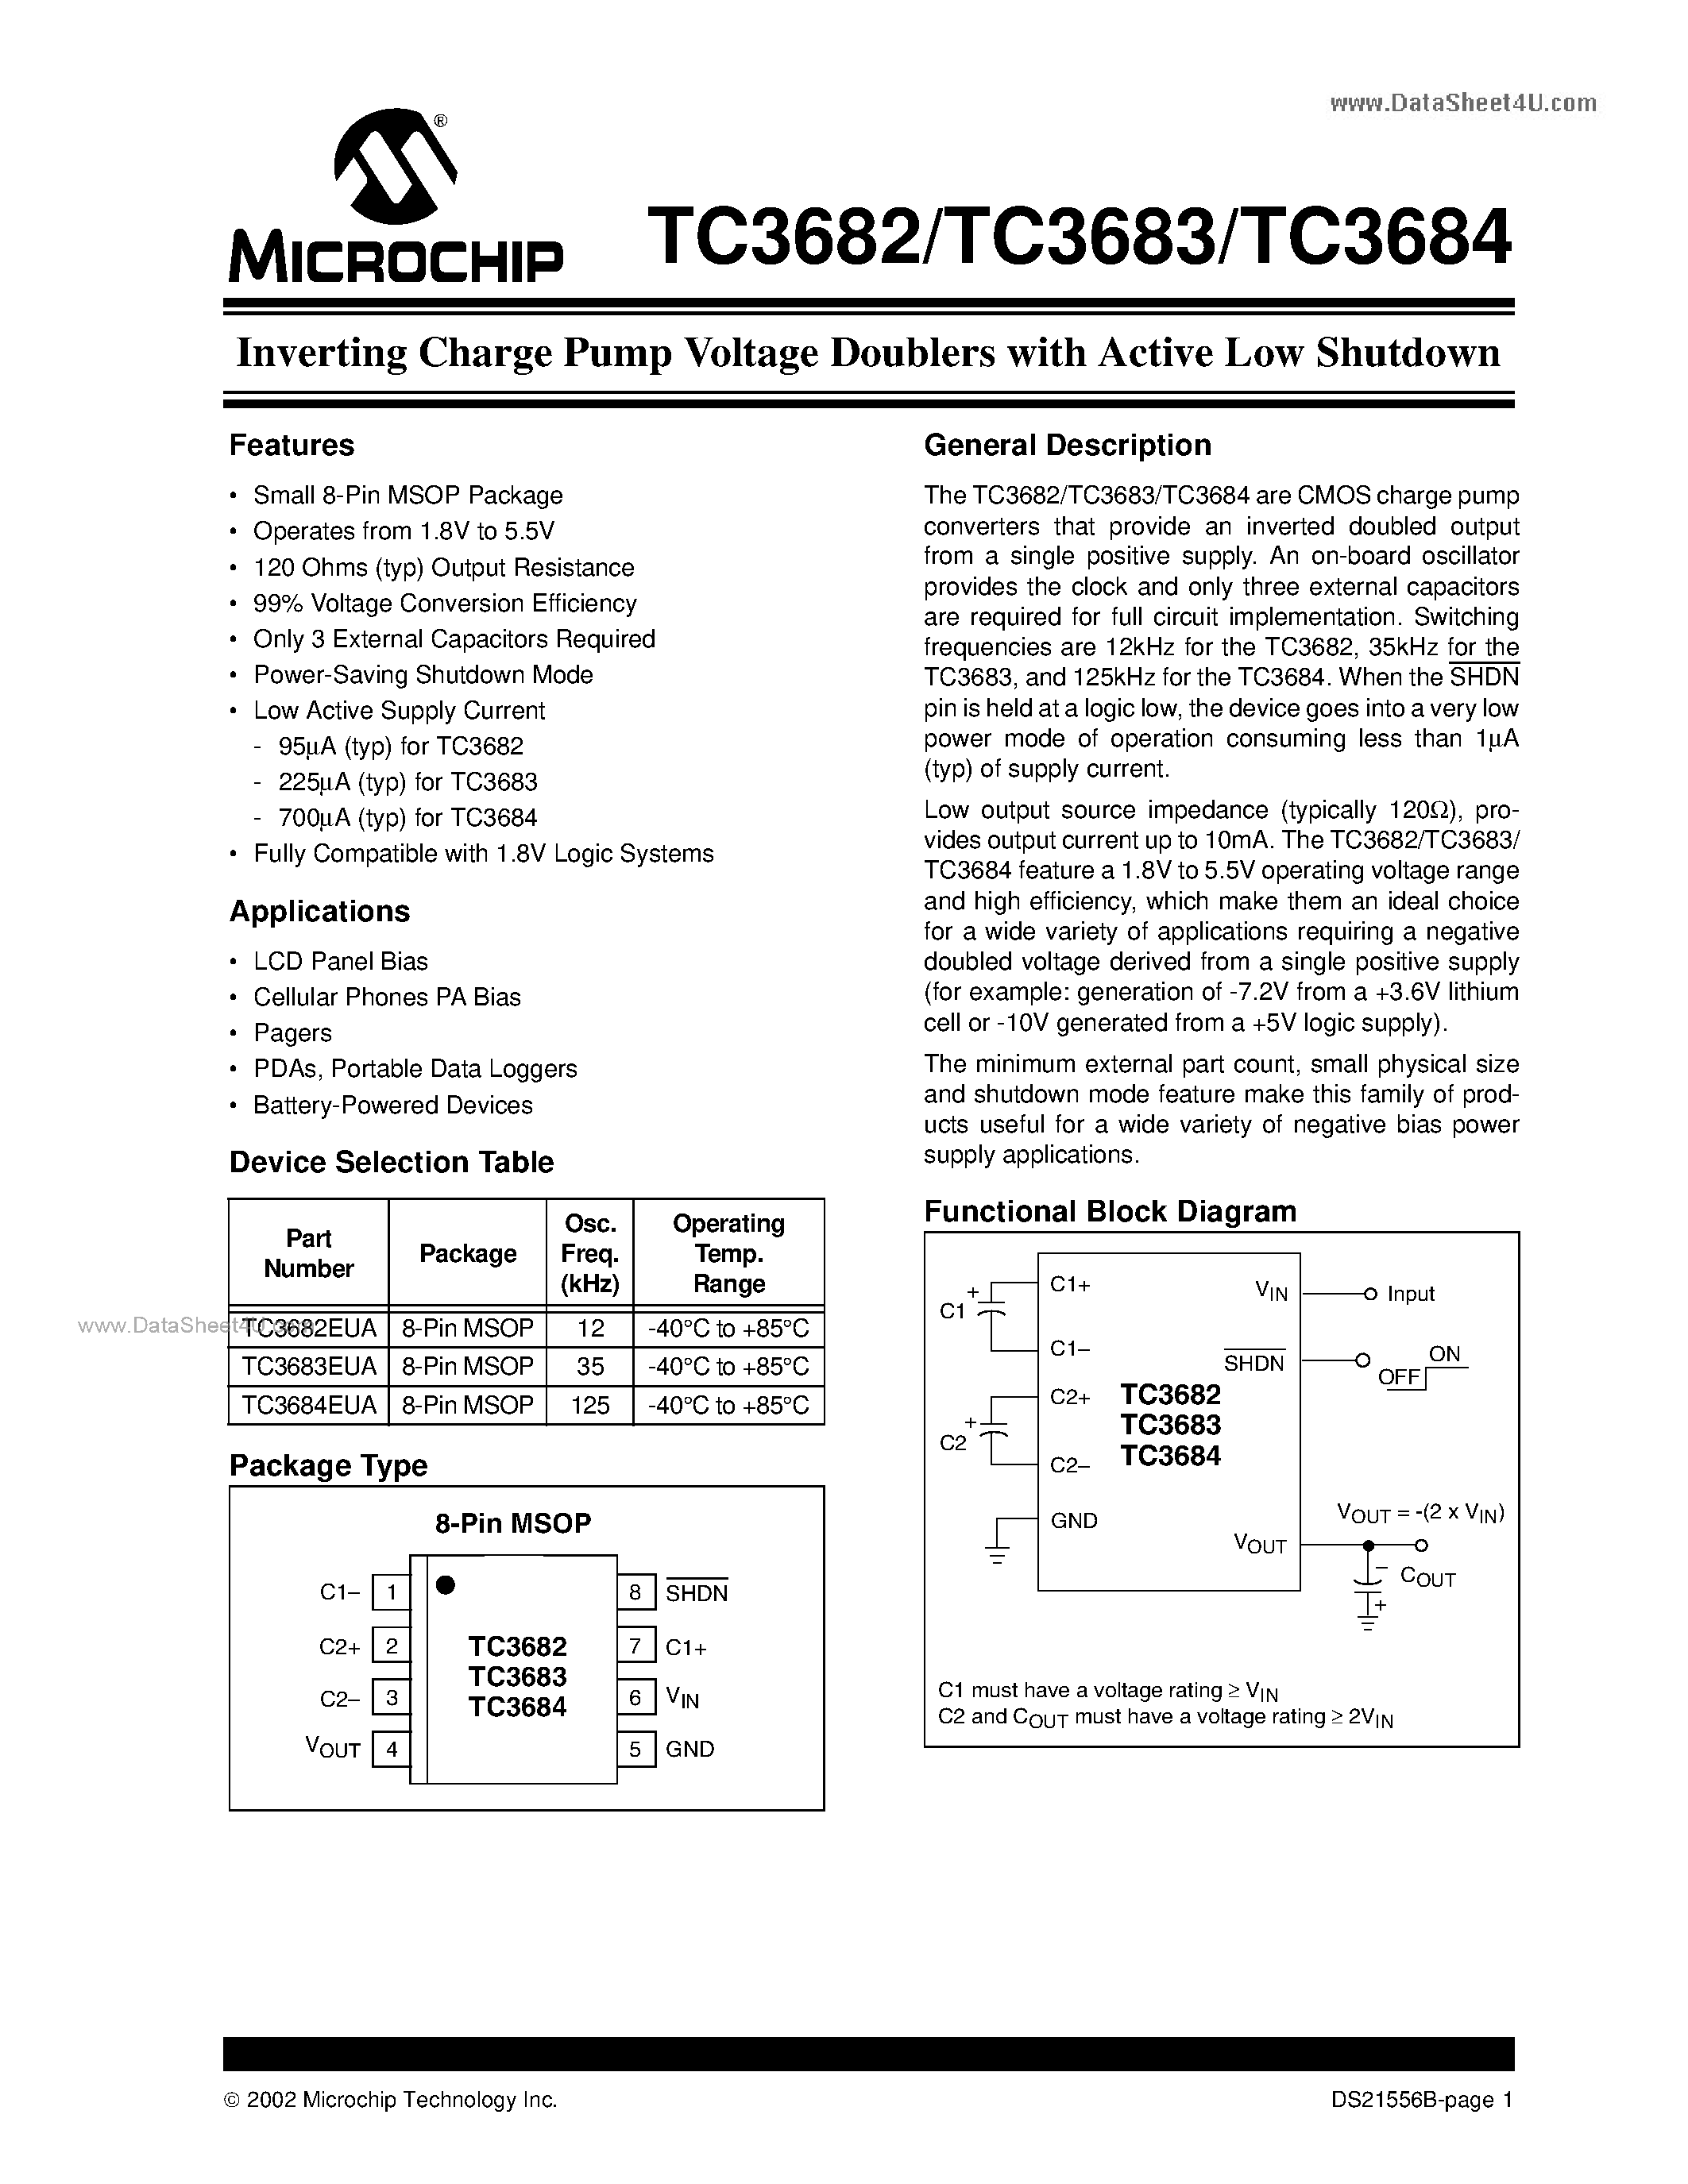 Datasheet TC3682 - (TC3682 - TC3684) Inverting Charge Pump Voltage Doublers page 1